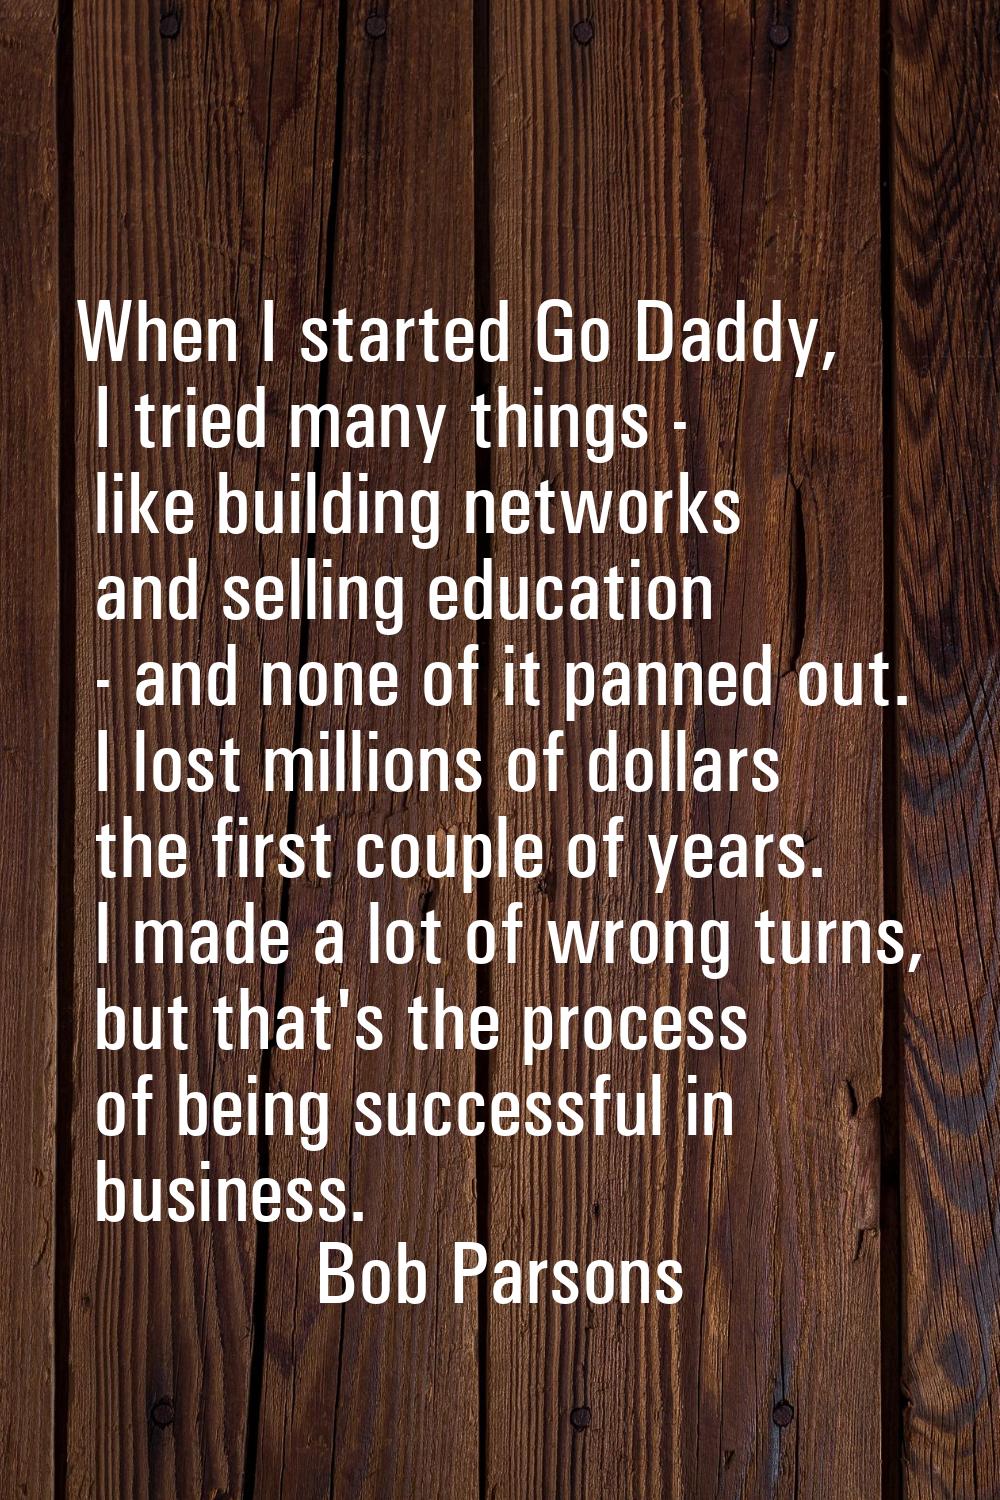 When I started Go Daddy, I tried many things - like building networks and selling education - and n